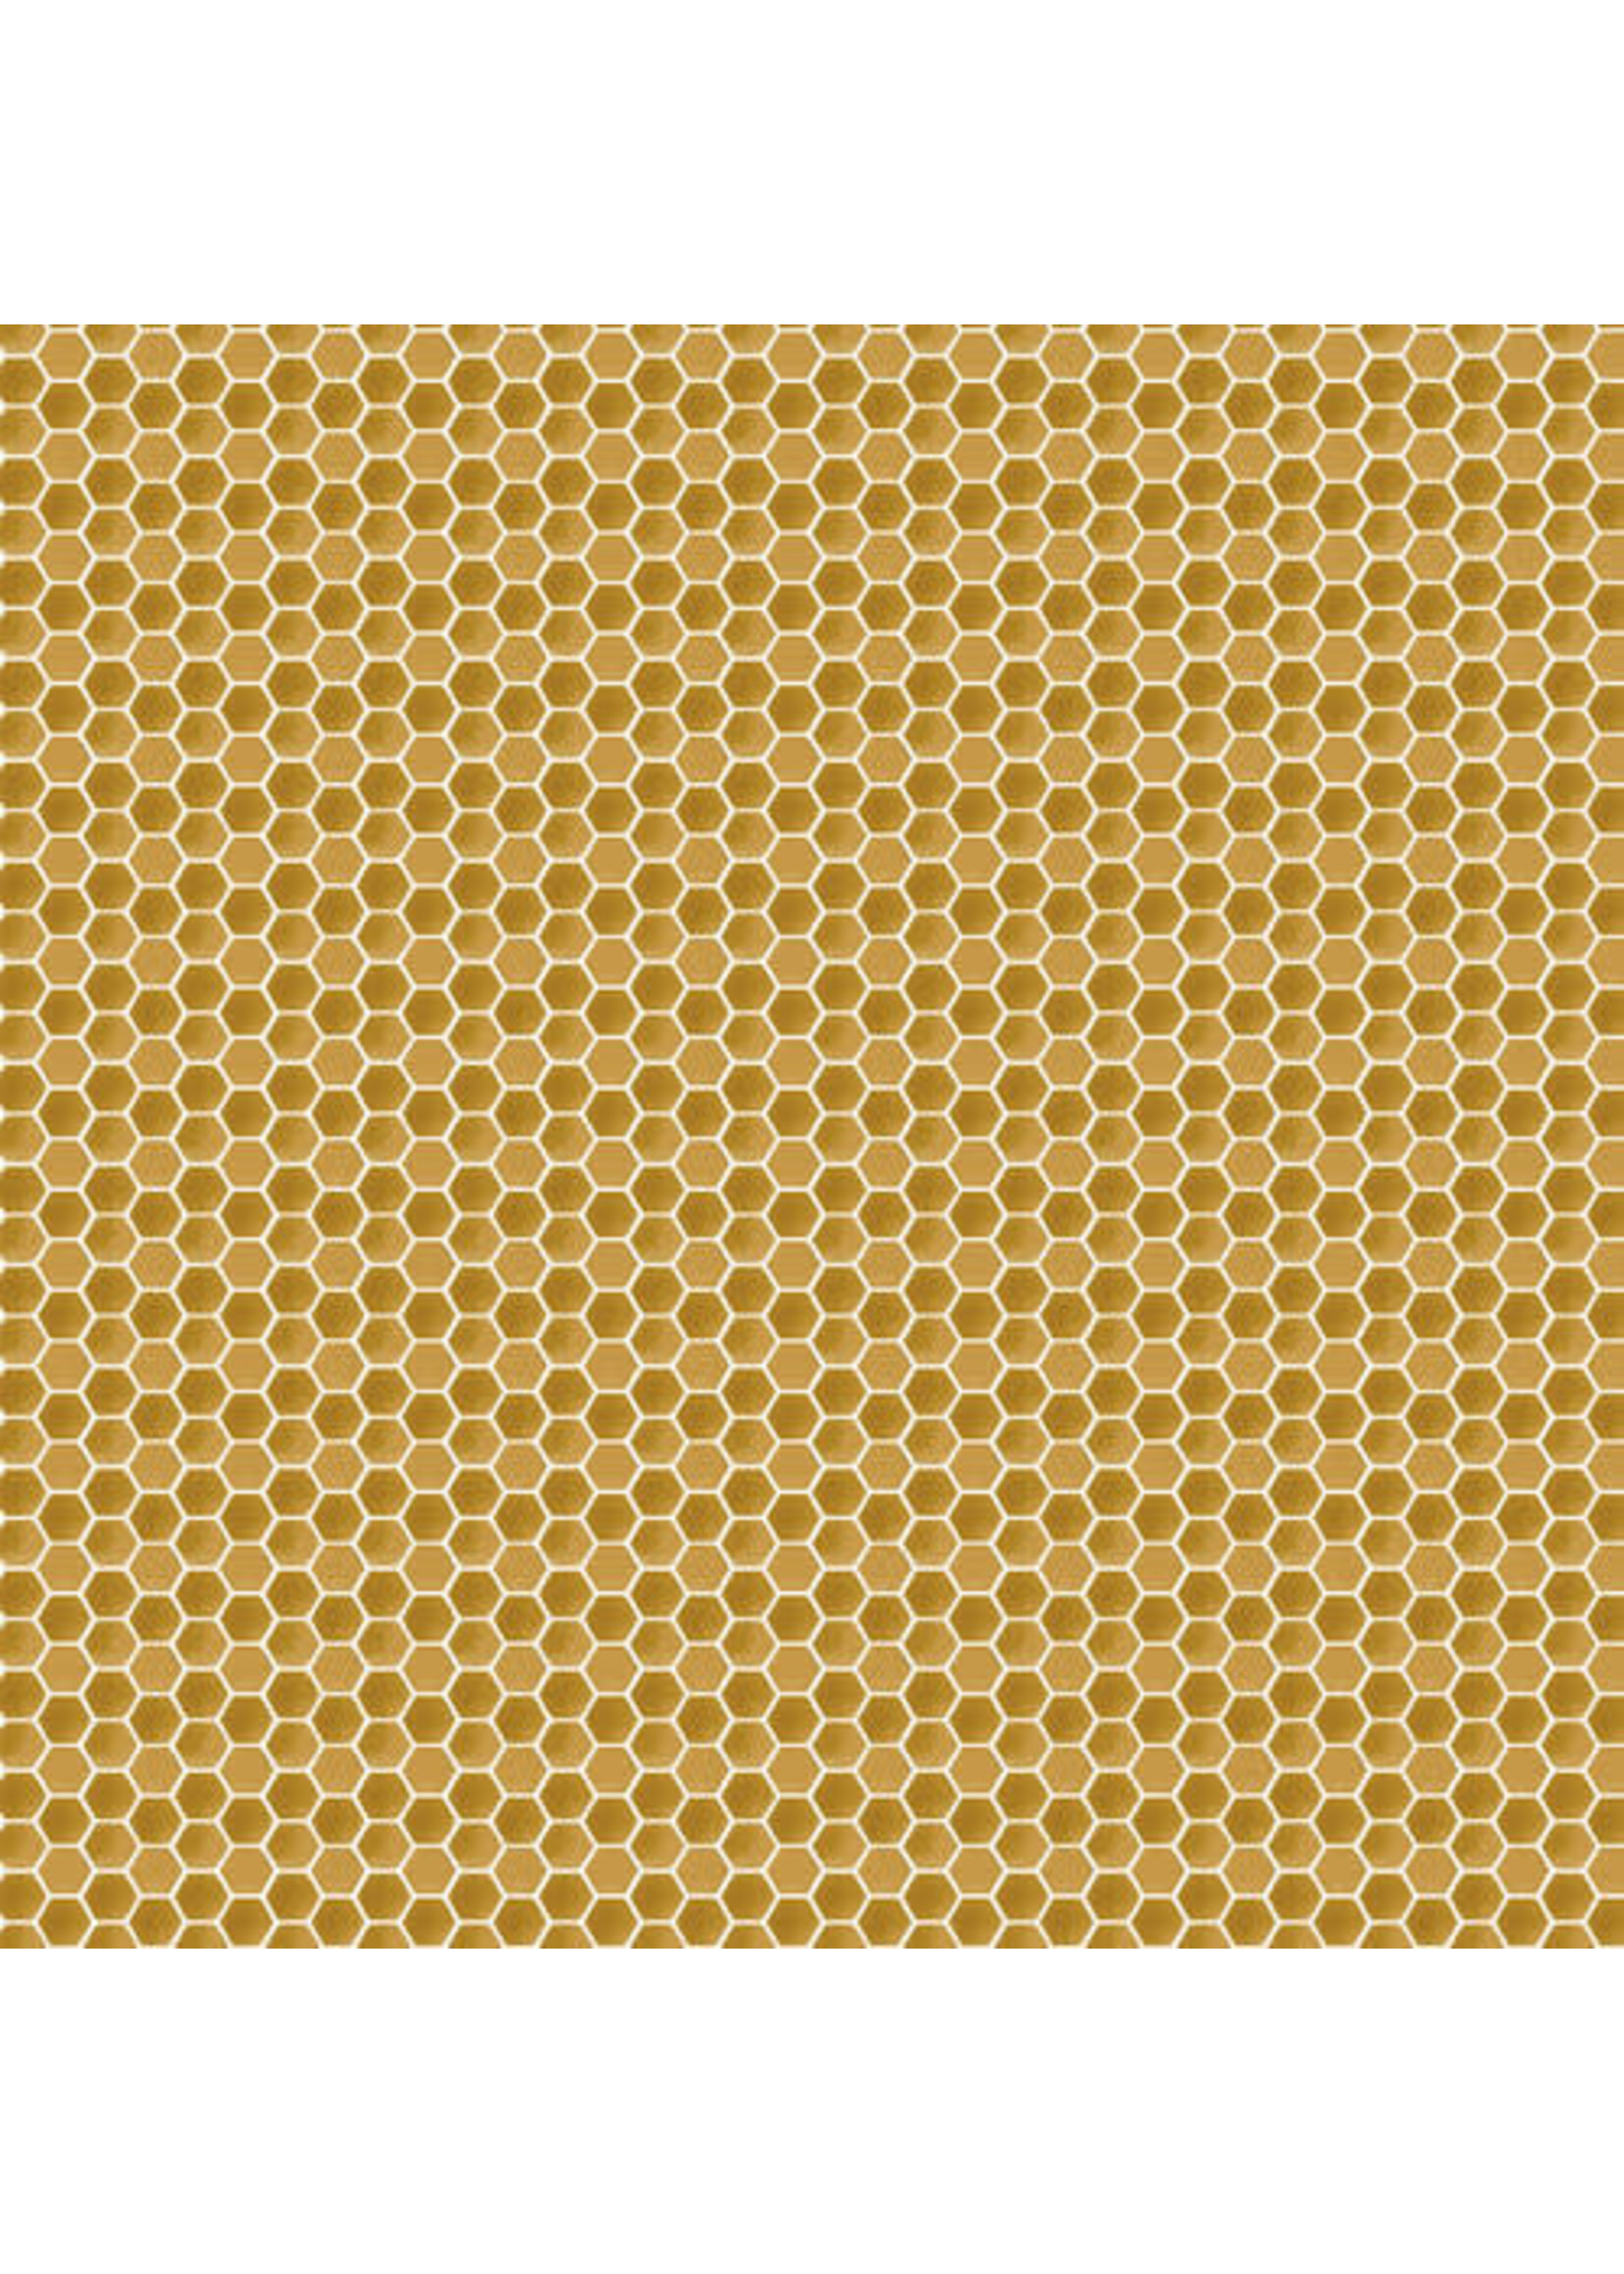 Blank Quilting Royal Jelly - Honey - 4802-913